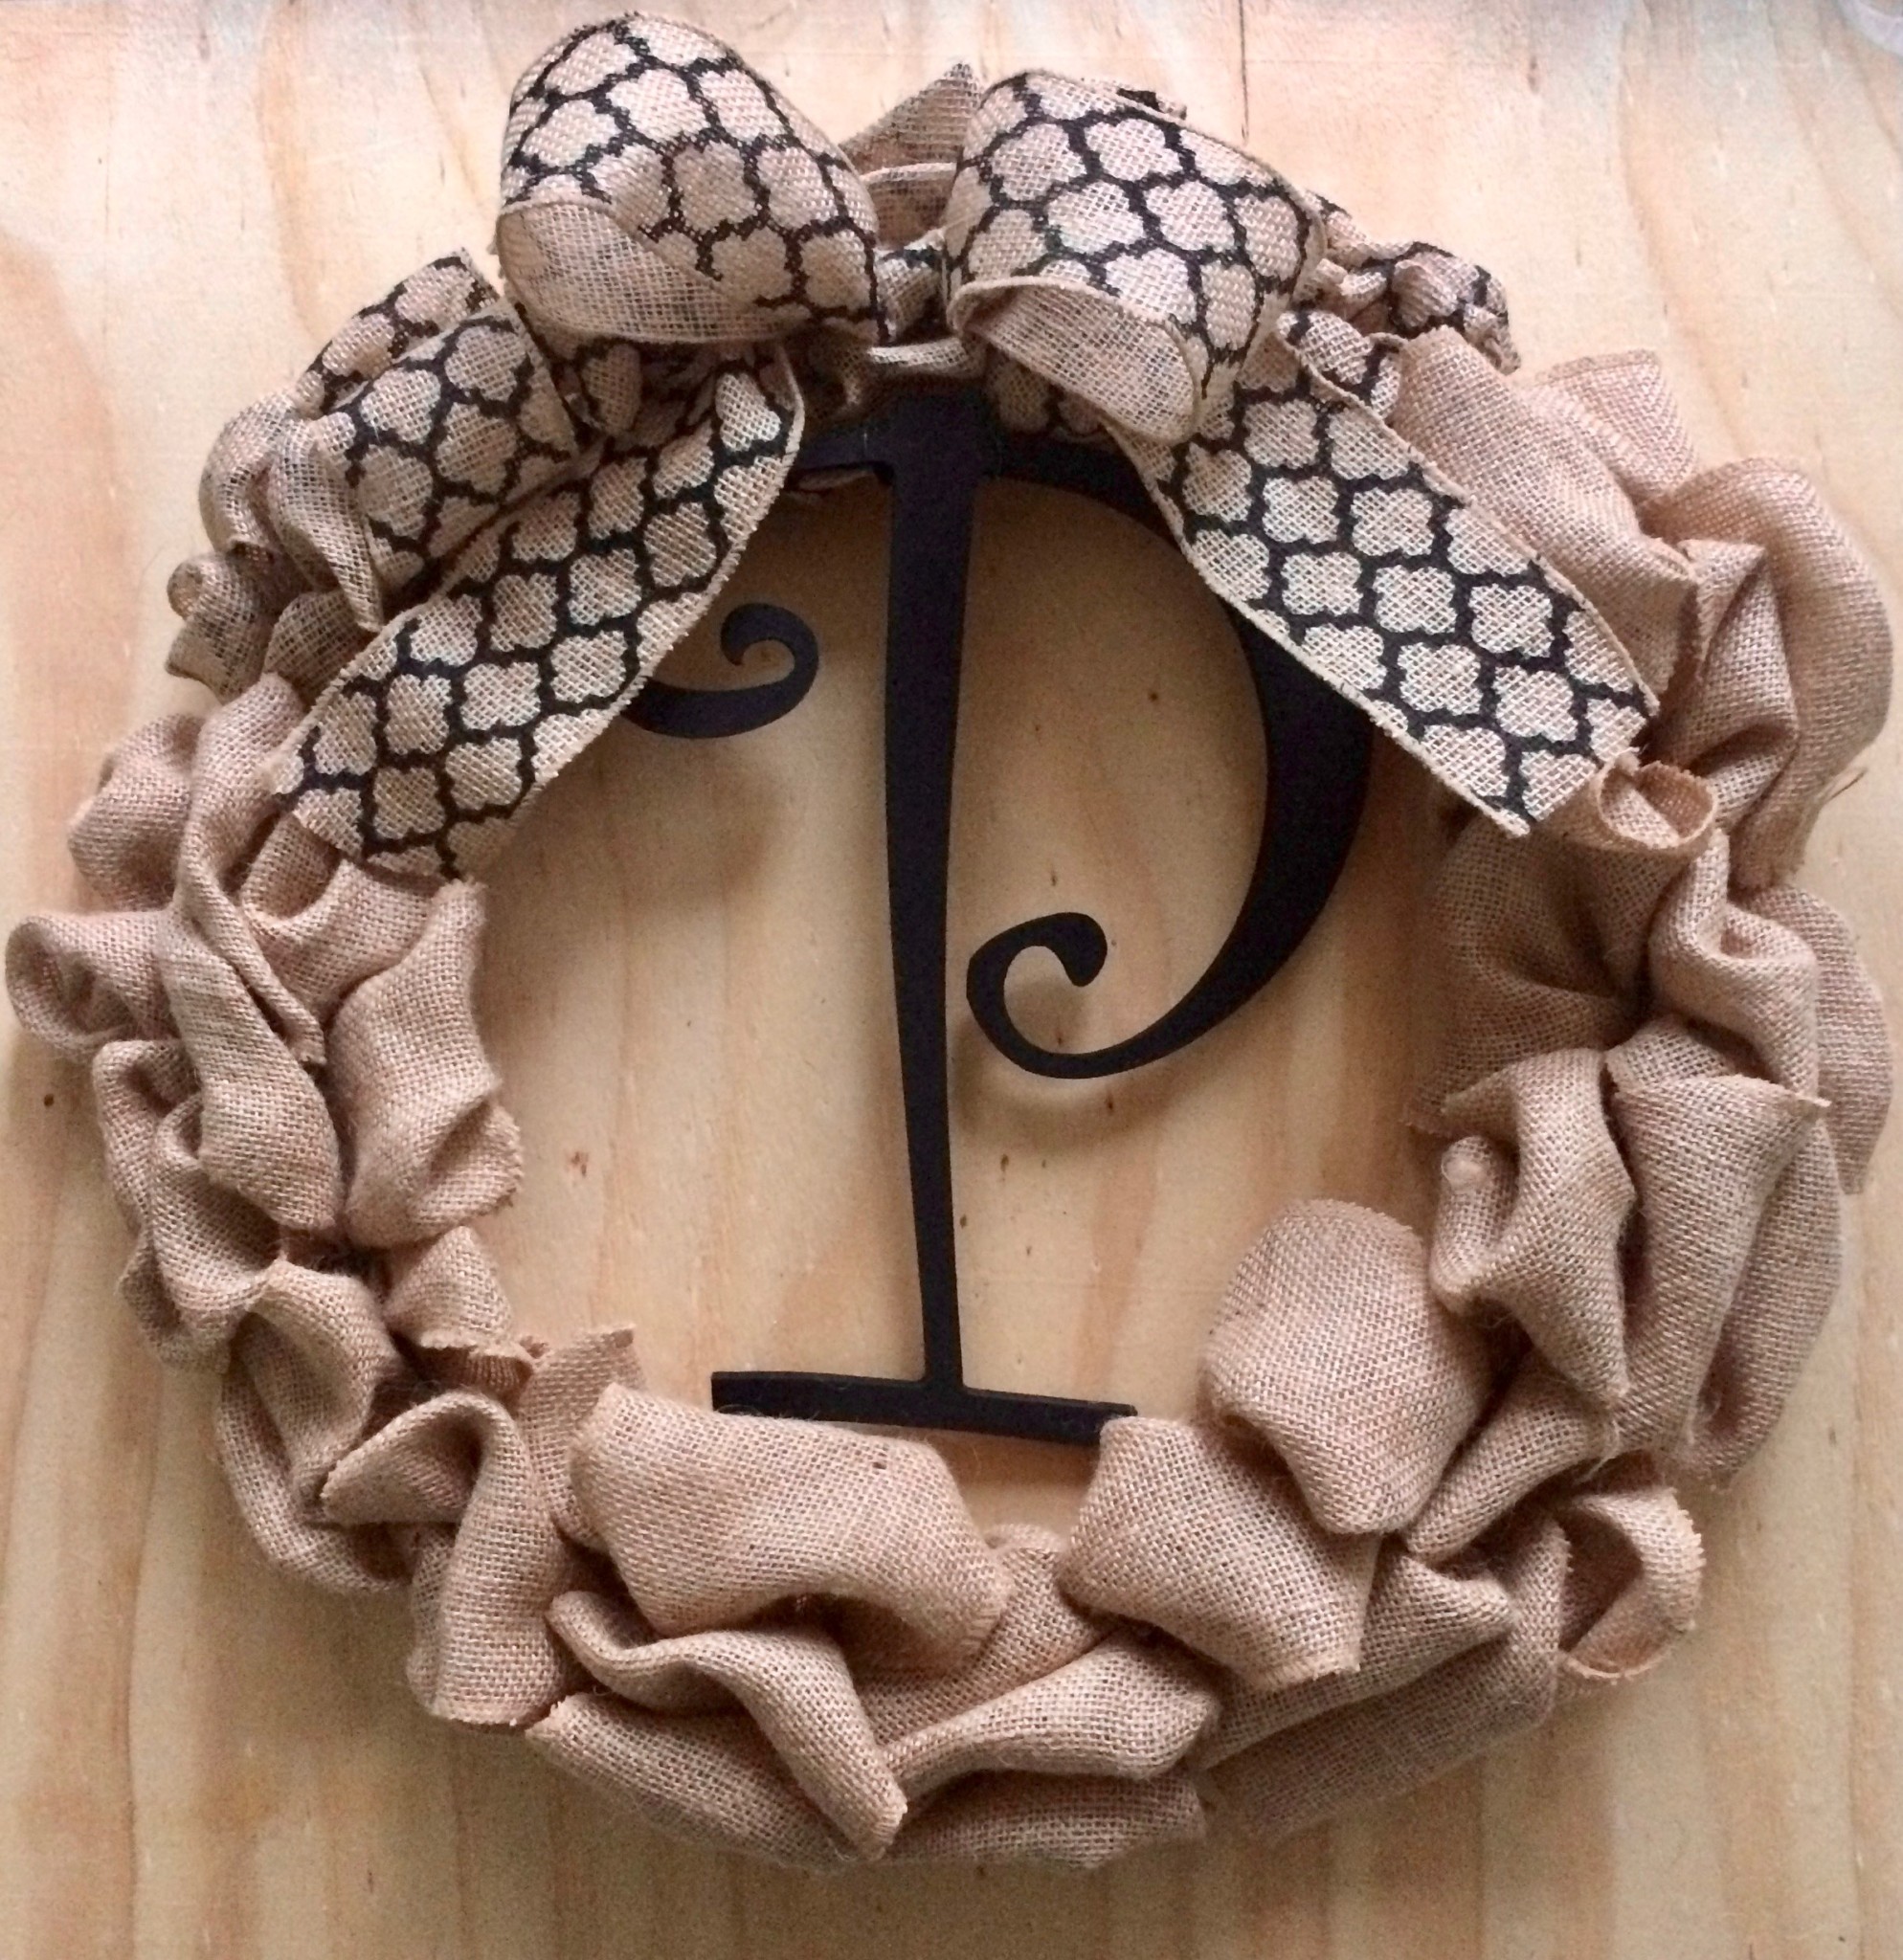 How To Make a Personalized Burlap Wreath 